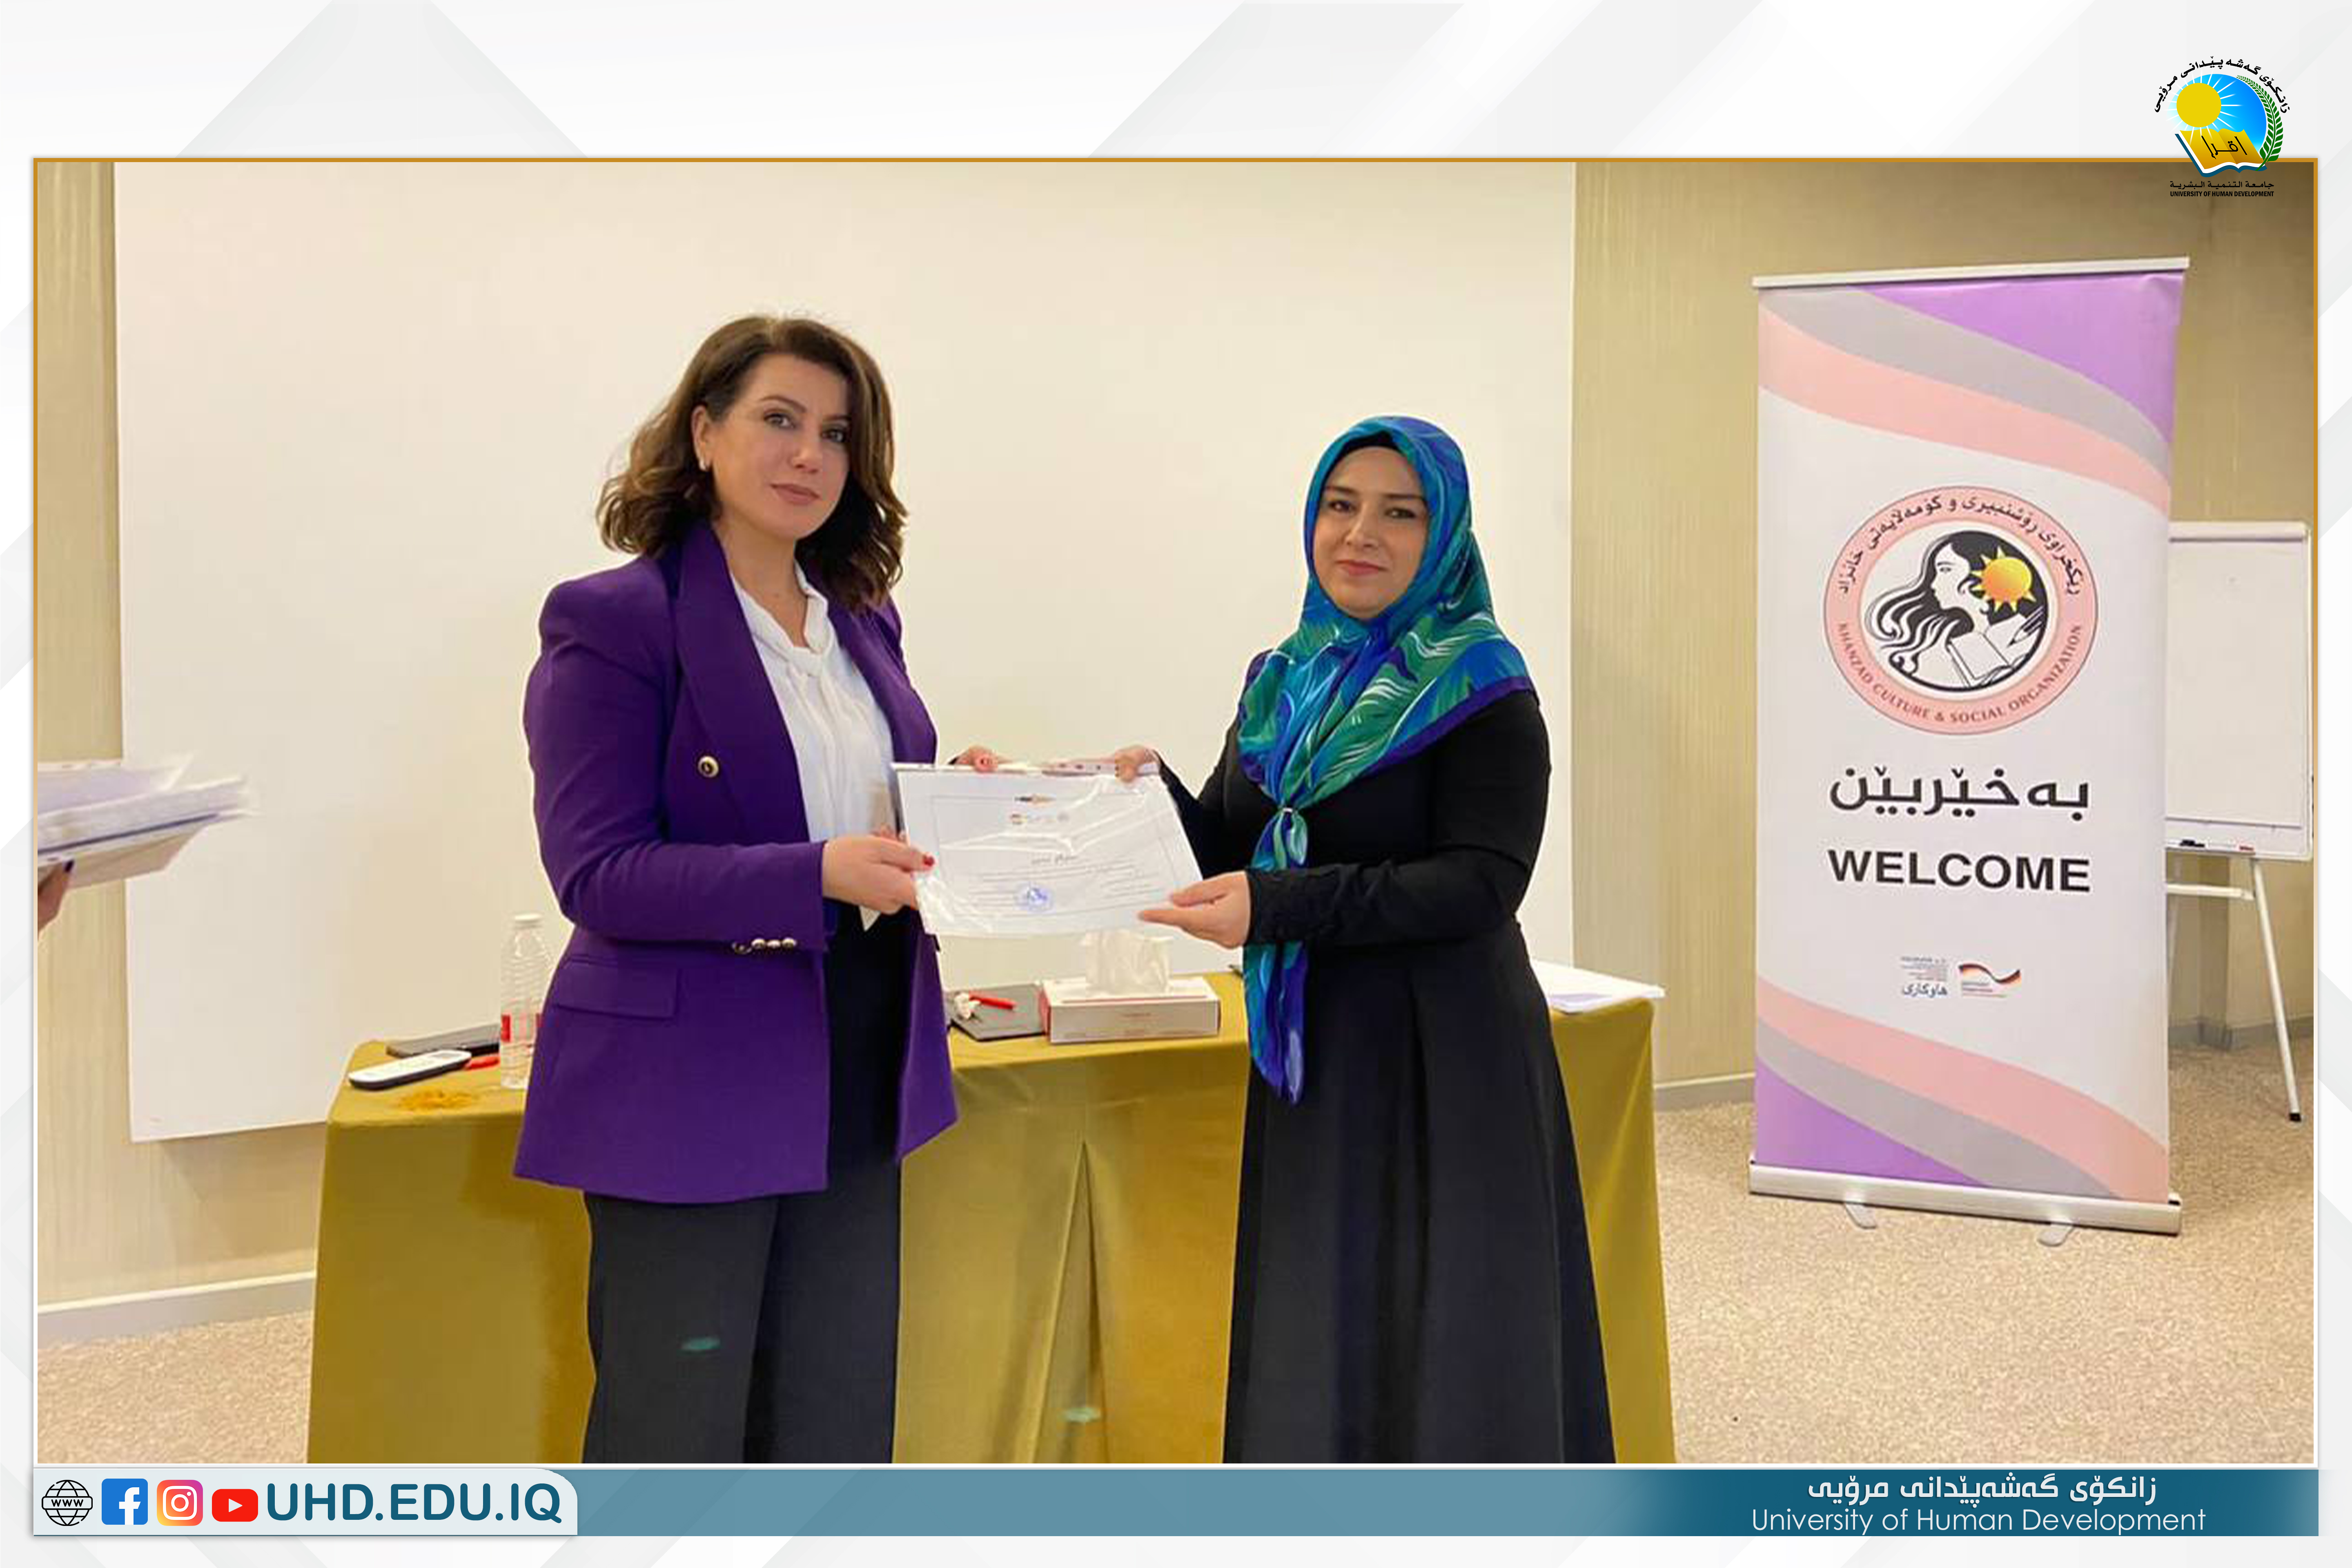 UHD law lecturer delivers seminars at a training course in Sulaymaniyah